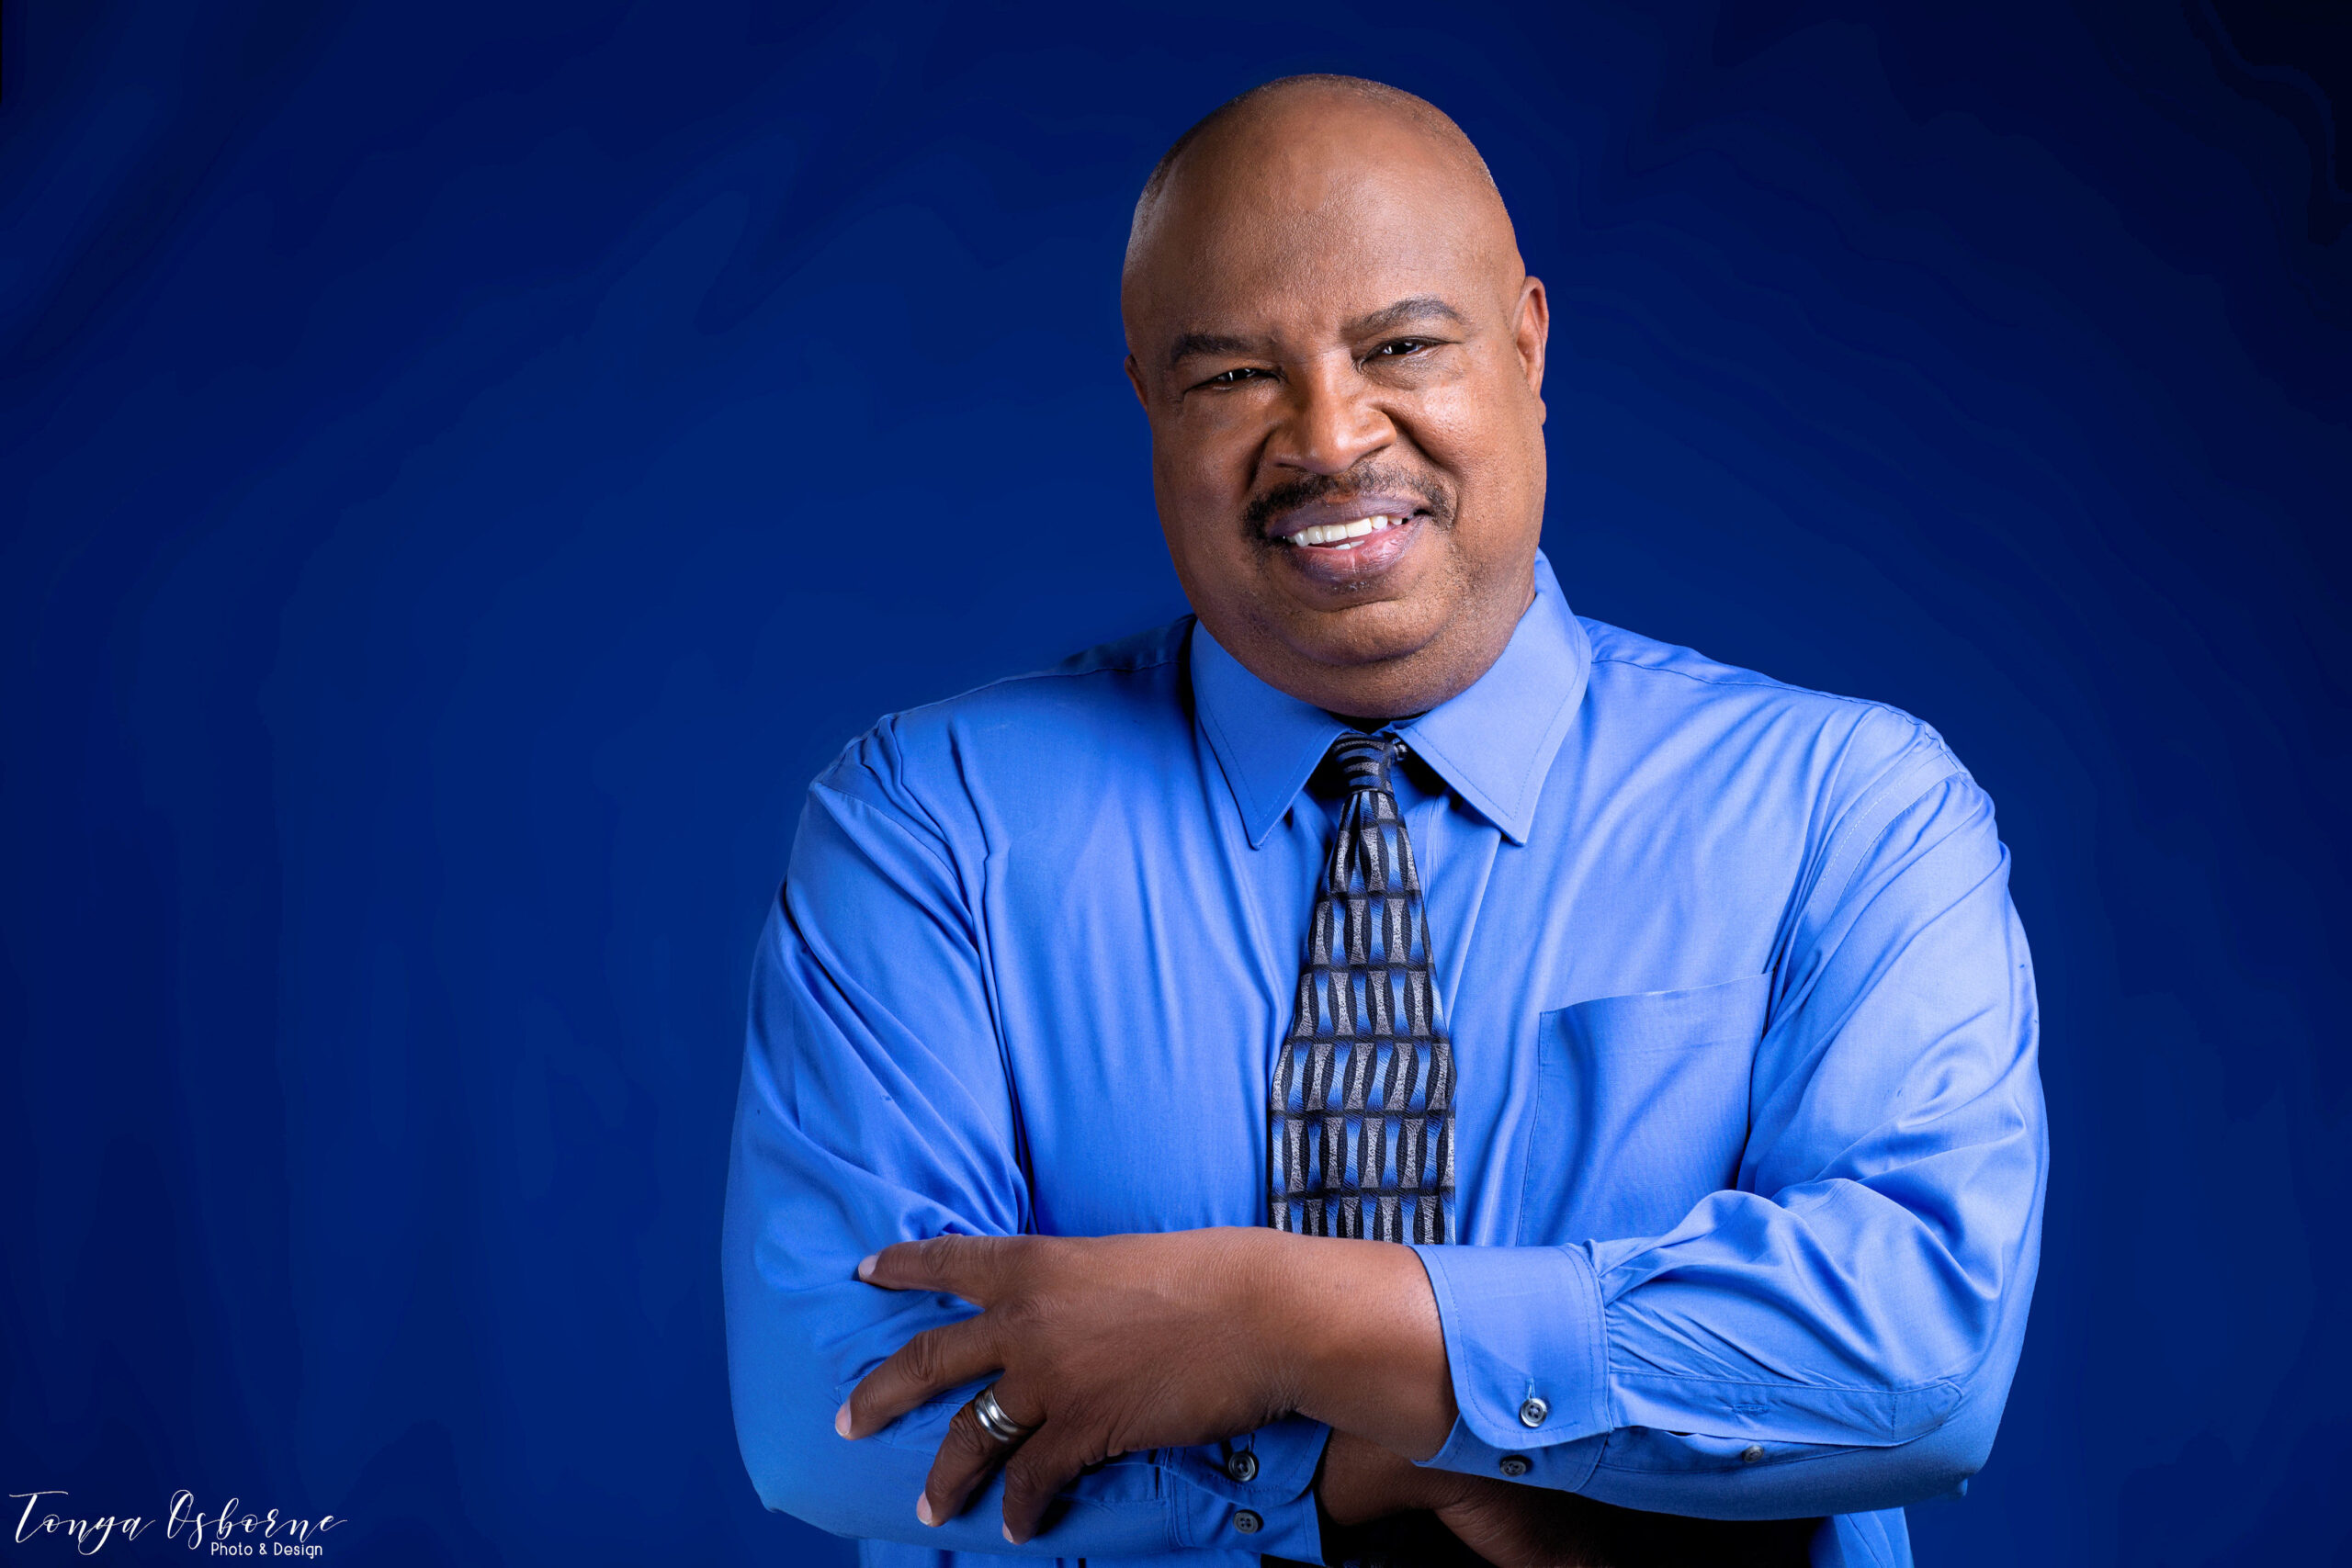 Stellar Awards winner, Cedric Bailey to be honored as the first Spin Awards Radio Announcer Of The Decade